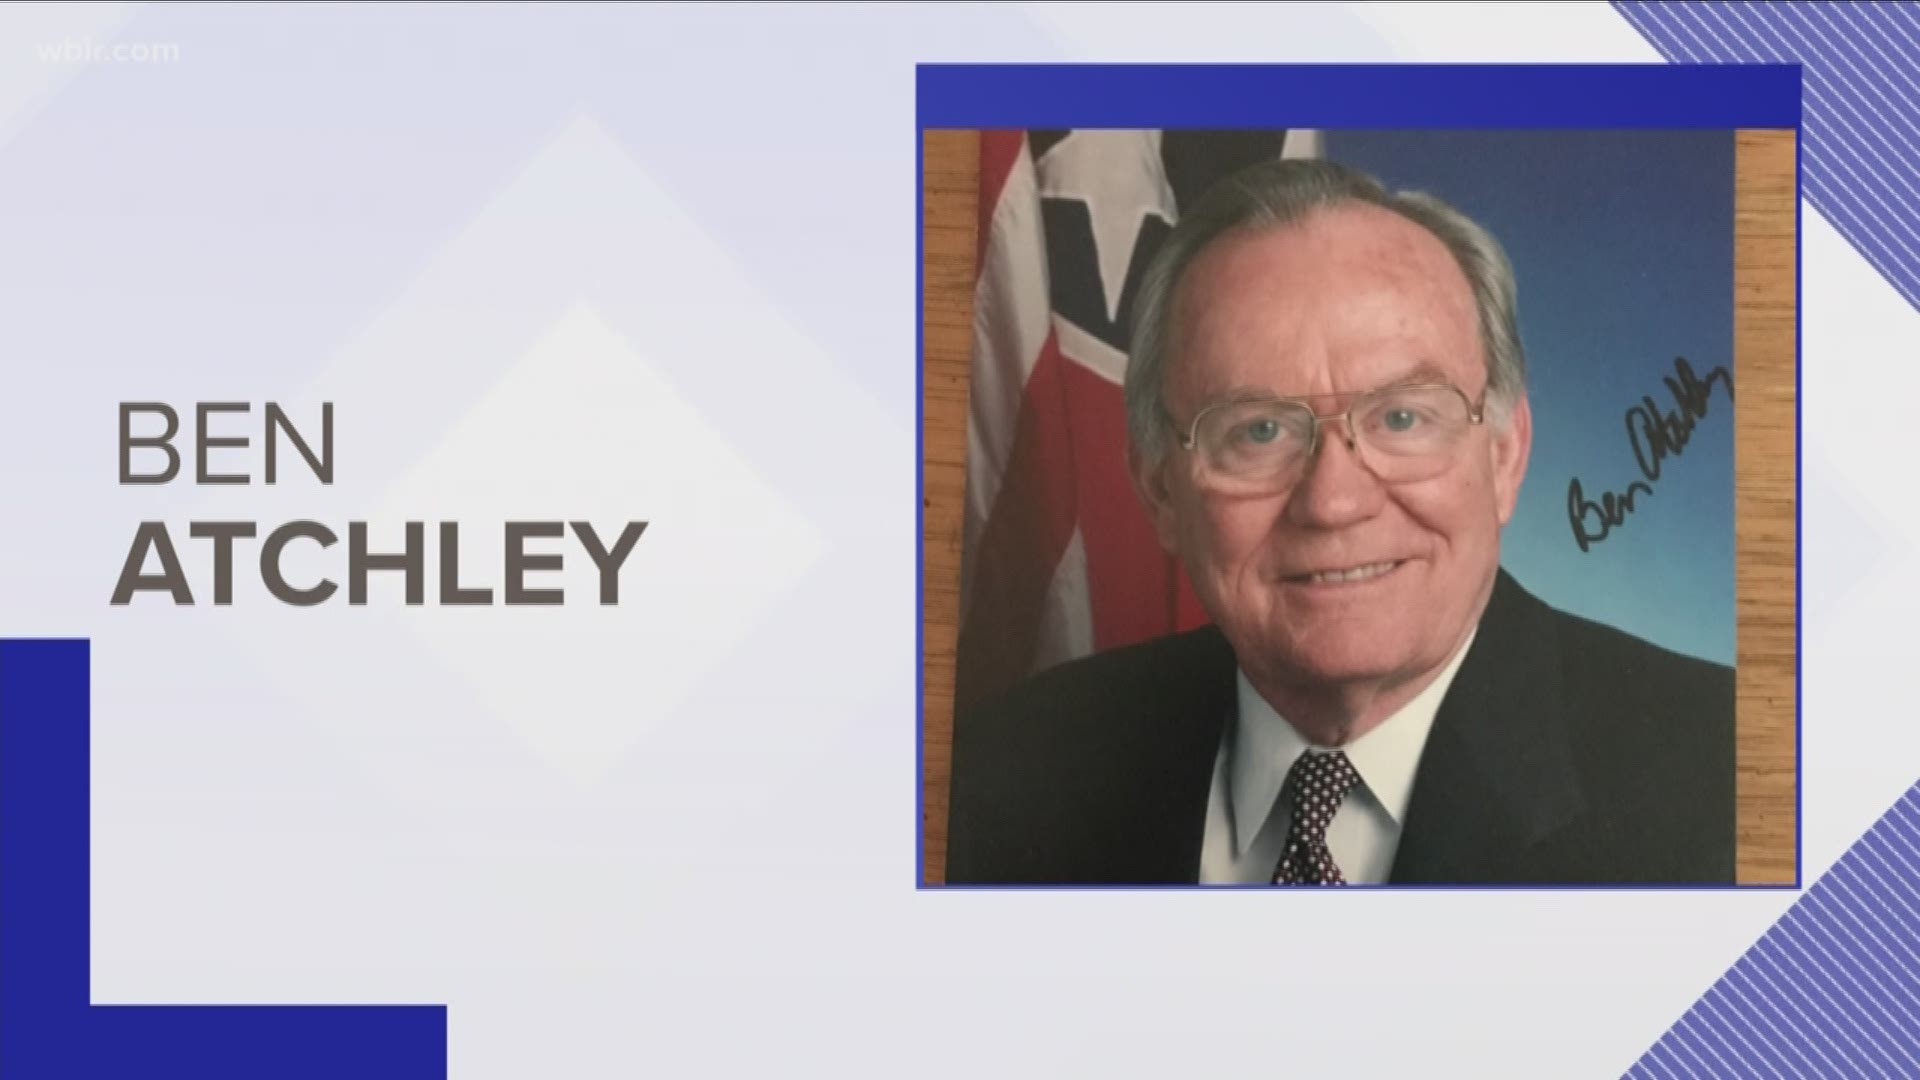 Family and friends said good bye to long-time state lawmaker Ben Atchley.